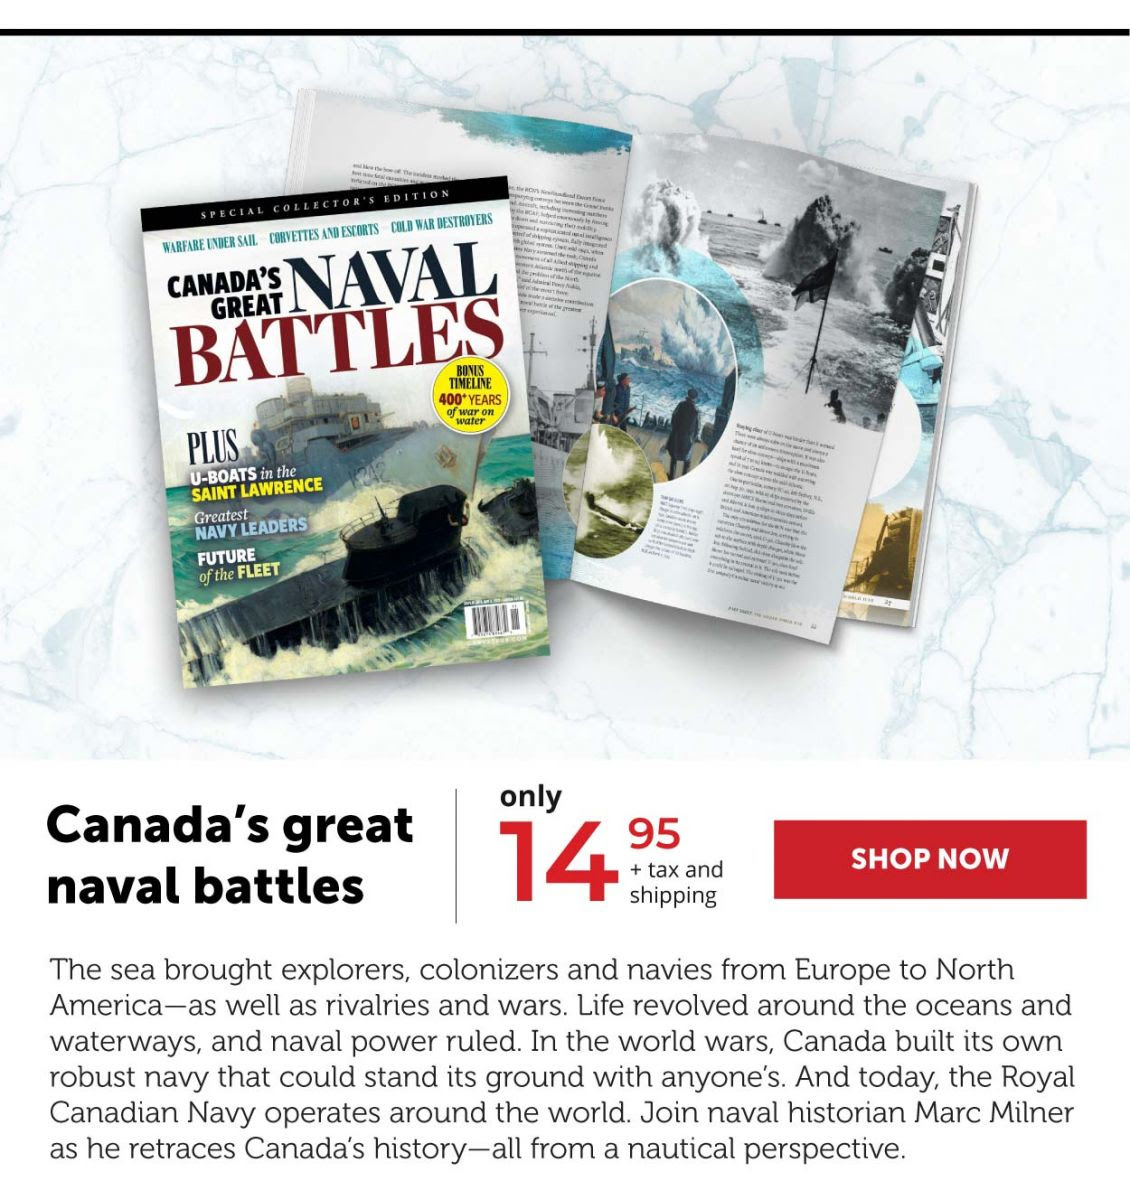 Canada's Great Naval Battles